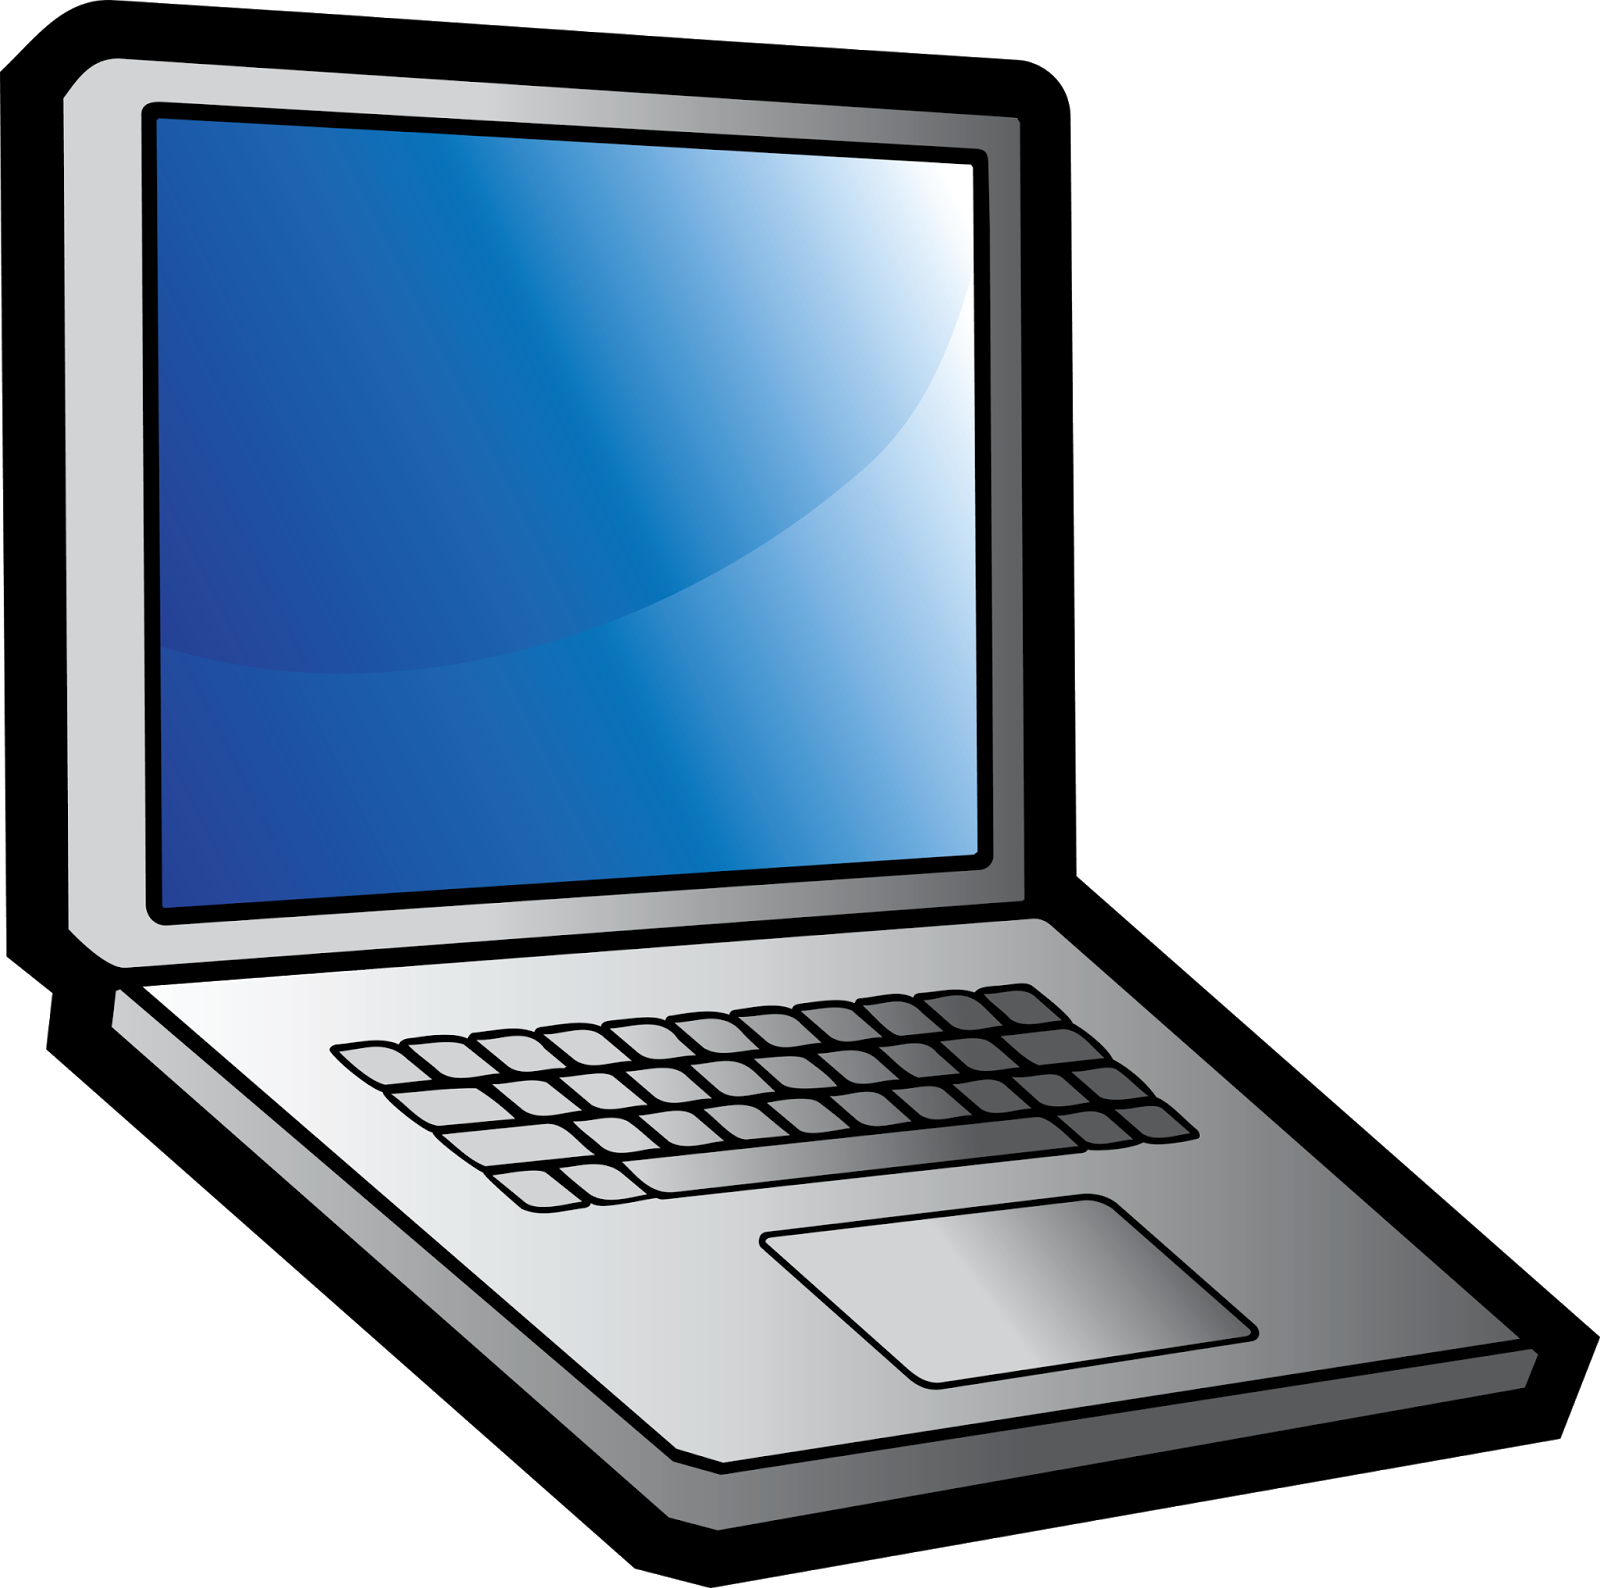 computer clipart collection - photo #41